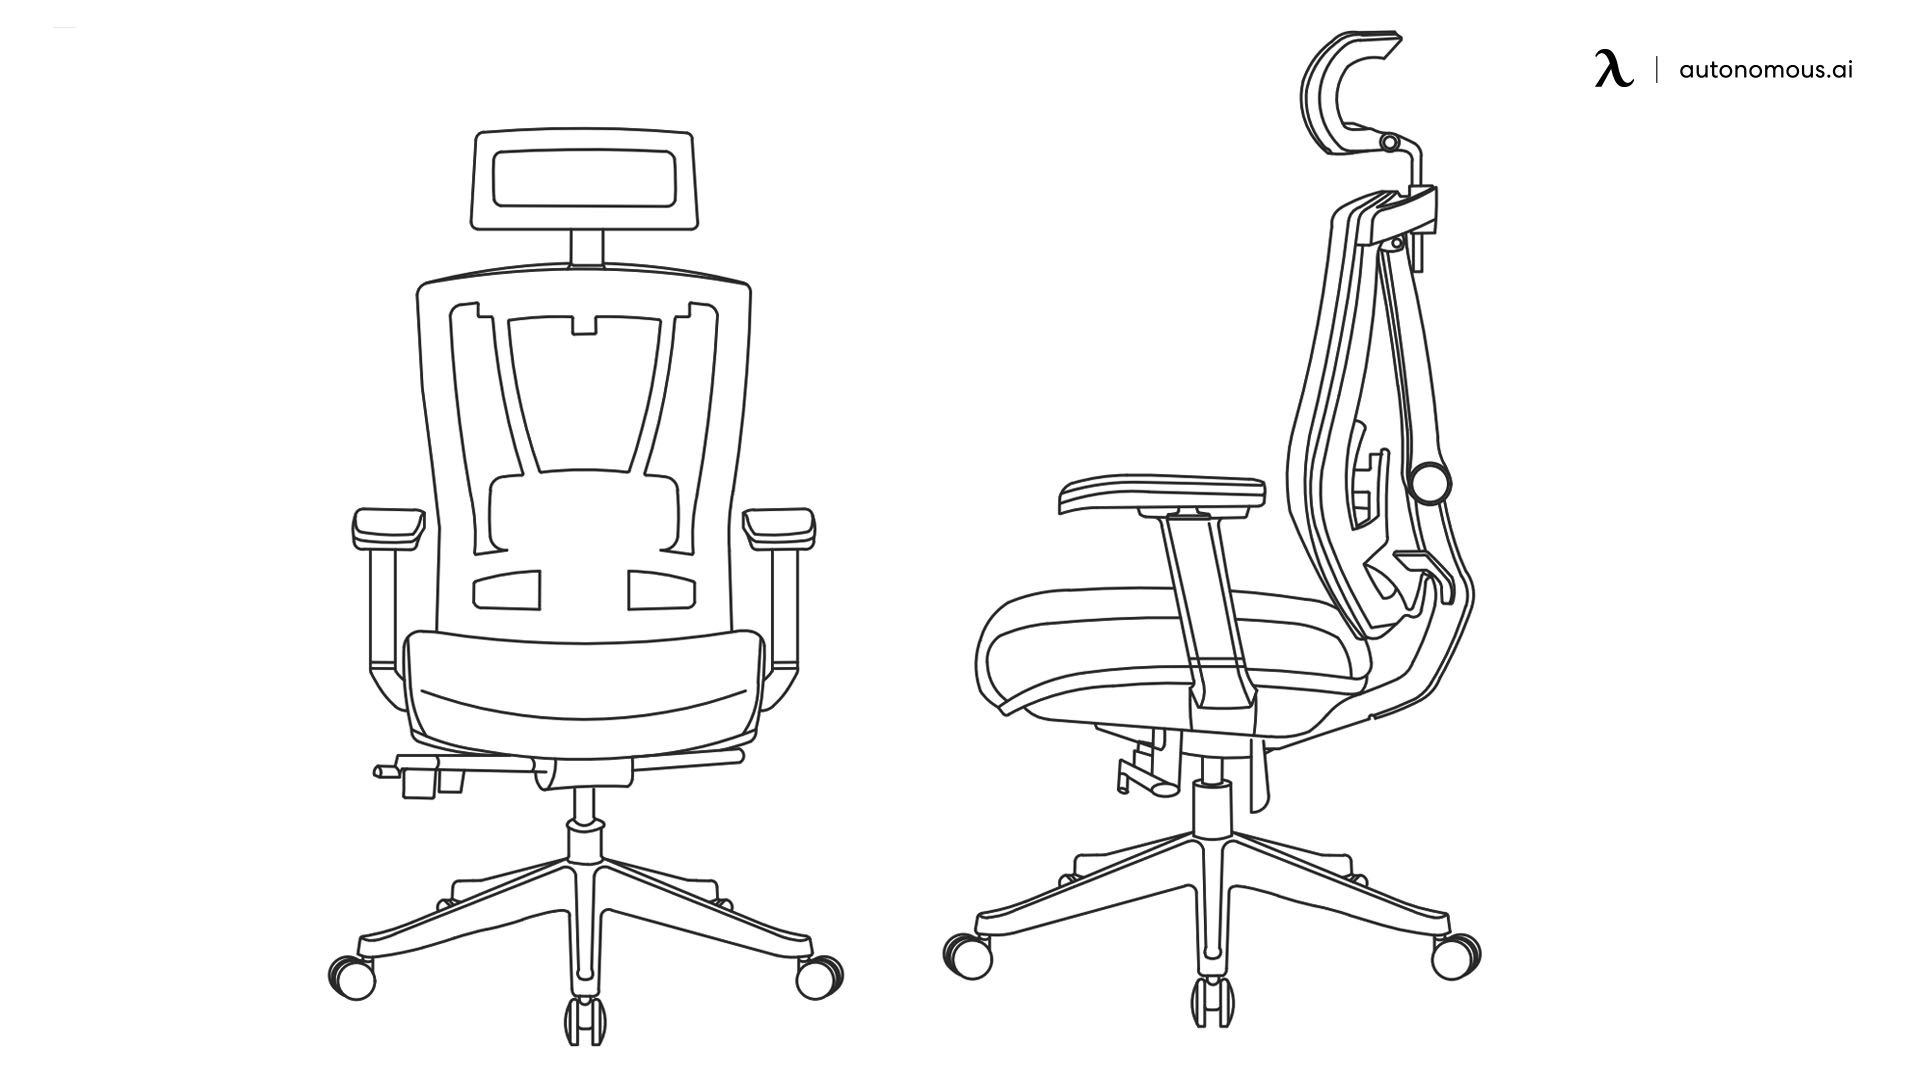 Build your own ergonomic chair step by step